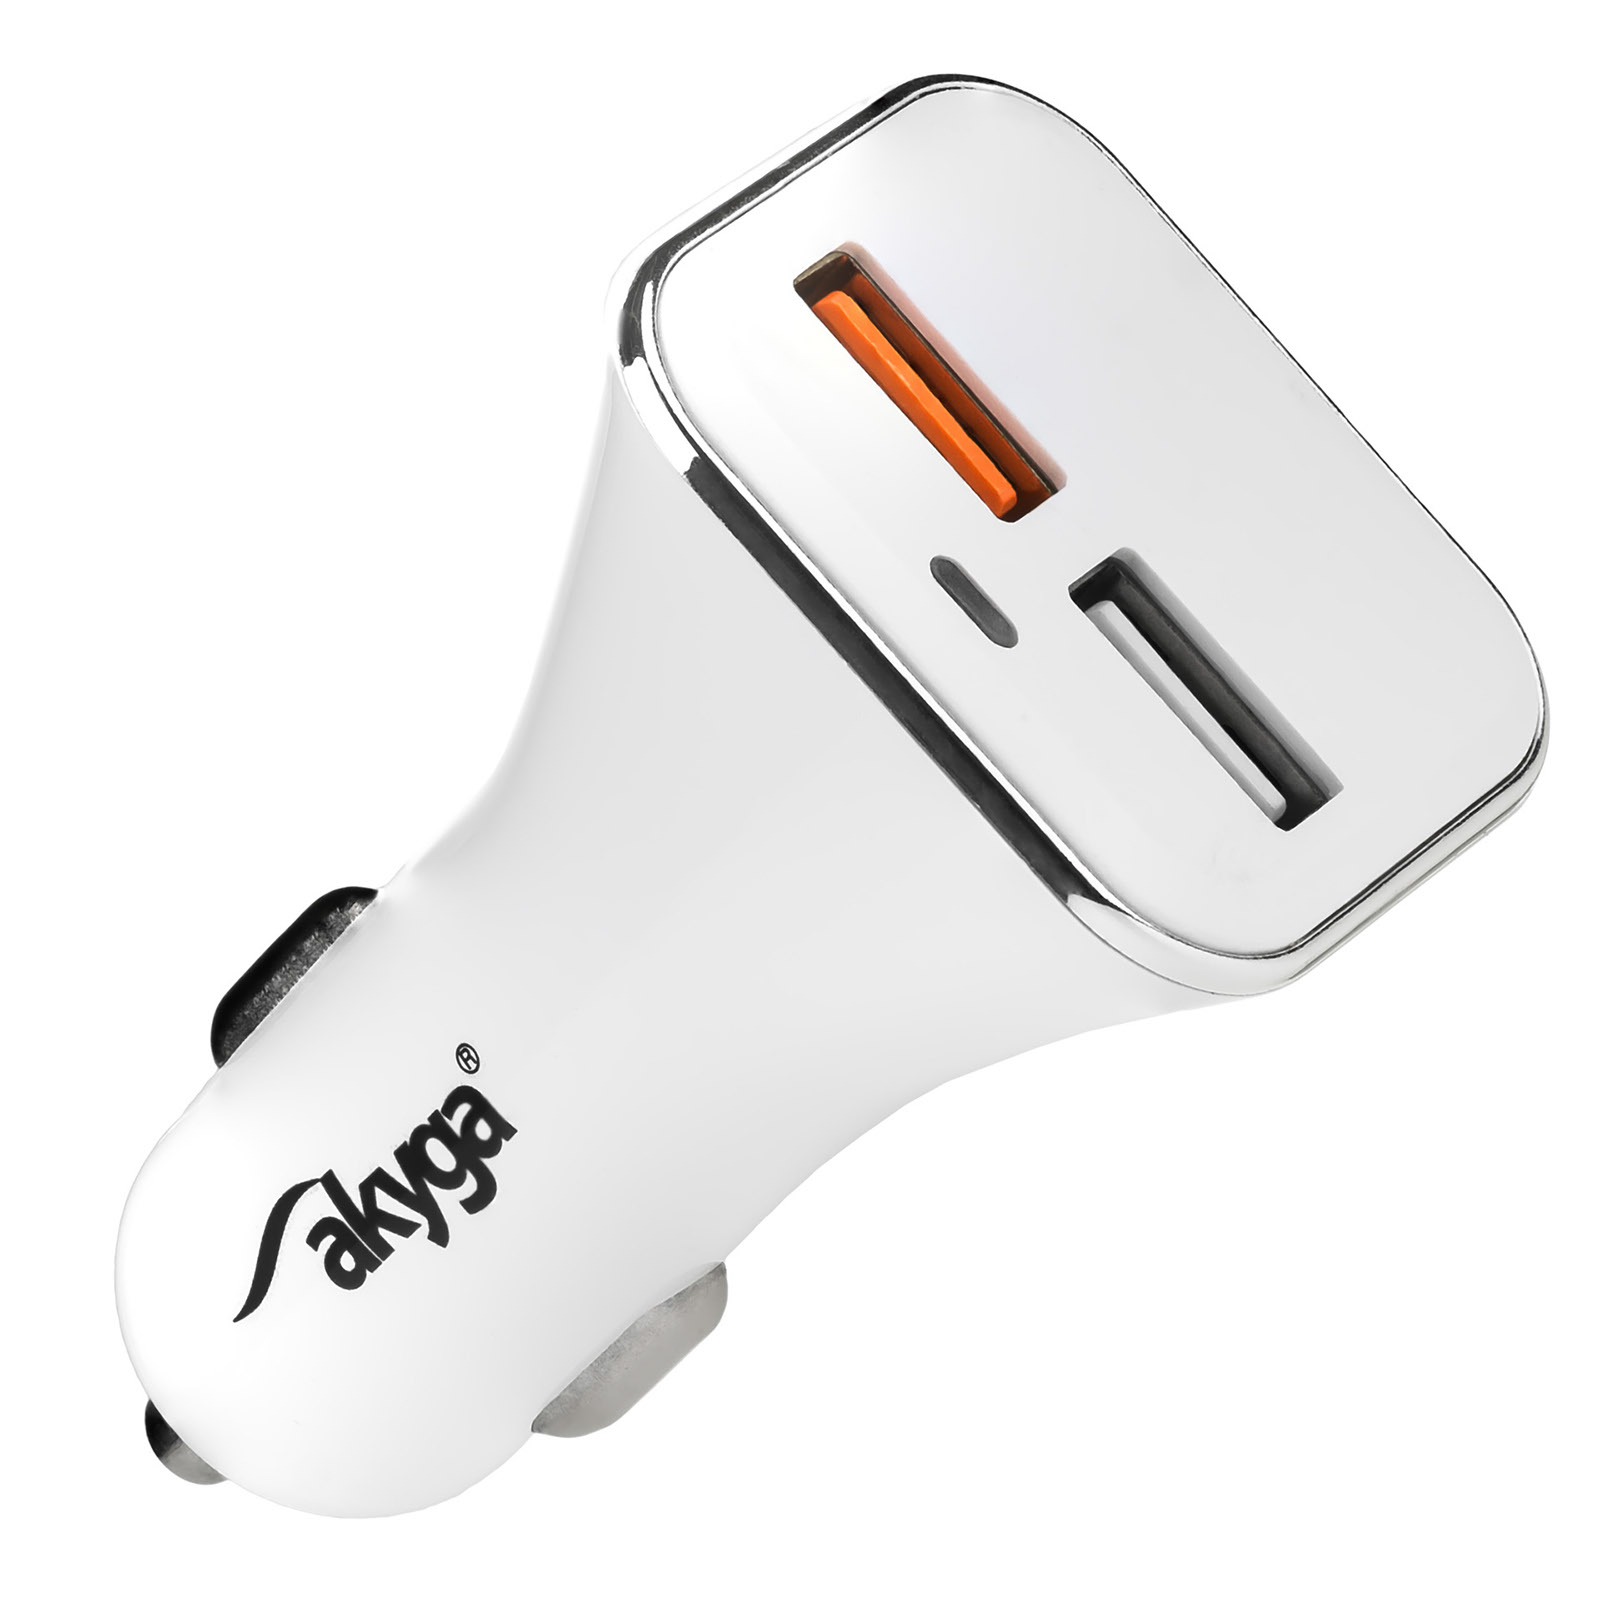 Main image USB Car Charger AK-CH-08 2x USB-A 5-12V / max. 3A 18W Quick Charge 3.0